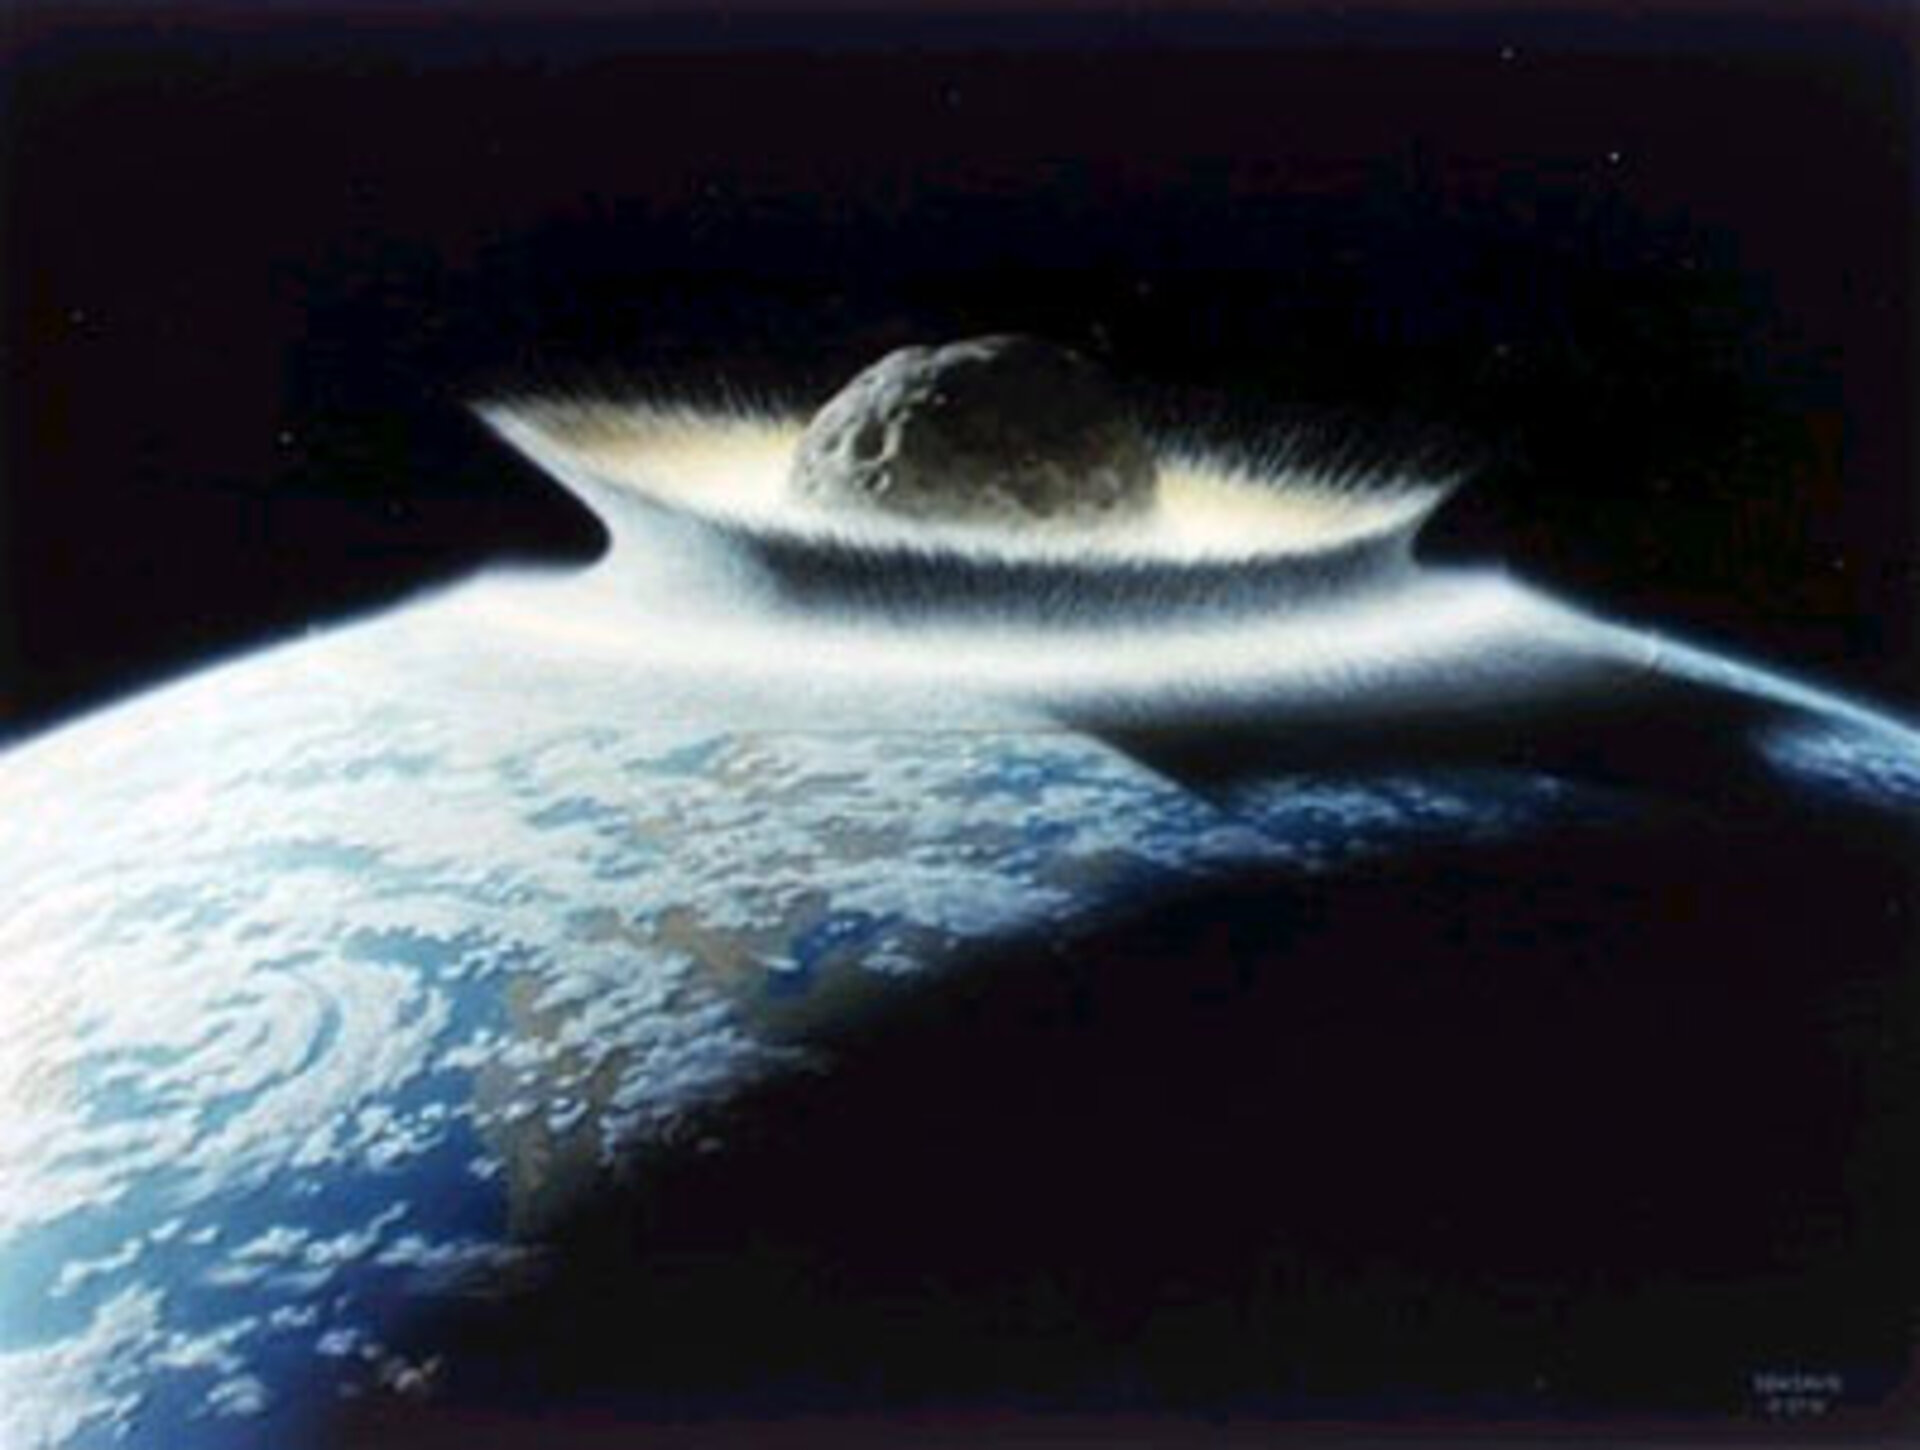 Artist's impression of a catastrophic asteroid impact with the Earth